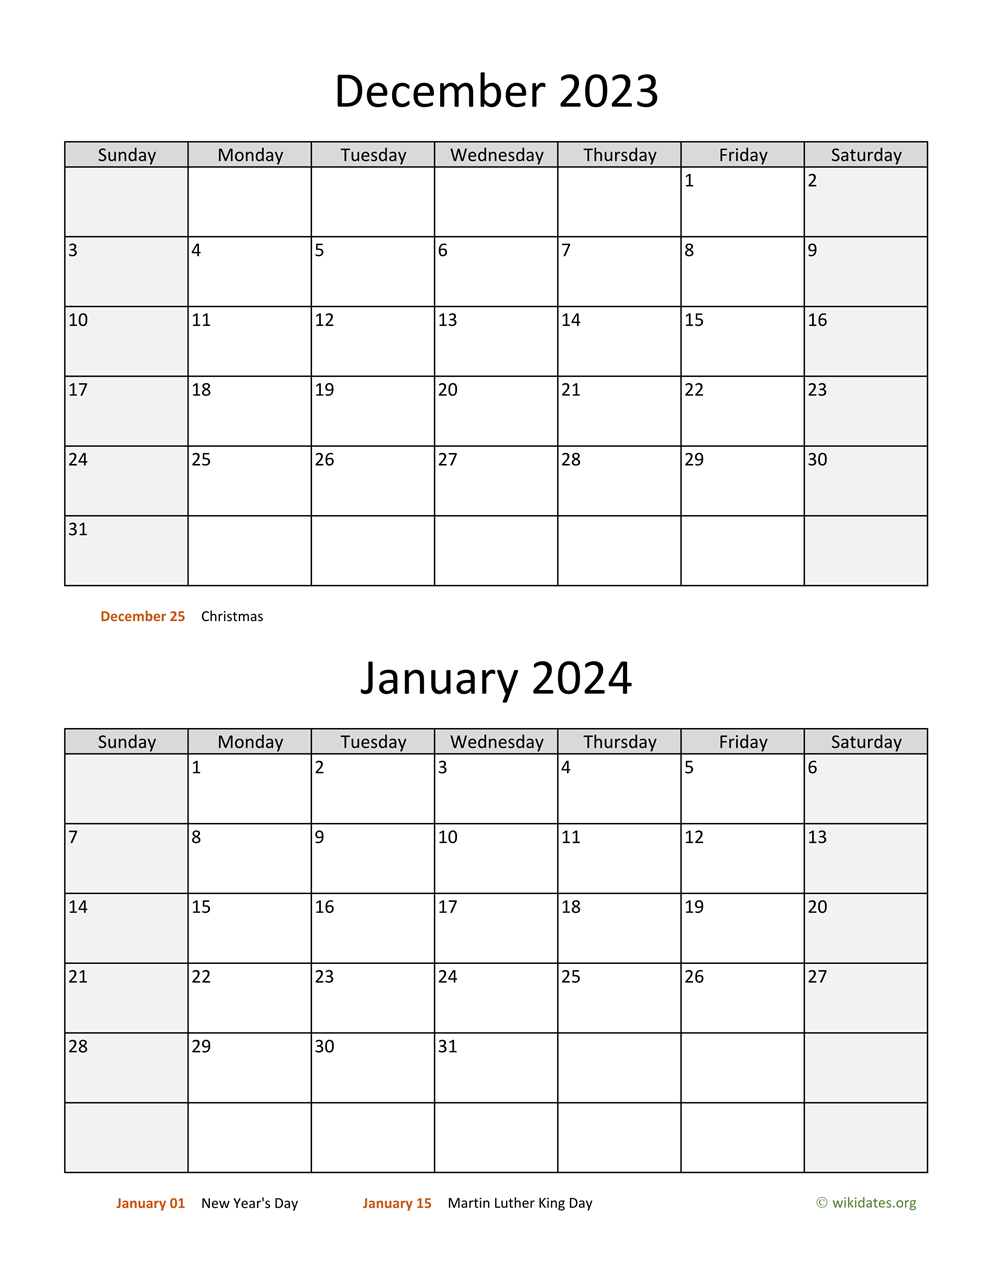 December 2023 And January 2024 Calendar | Wikidates for Printable December 2023 January 2024 Calendar